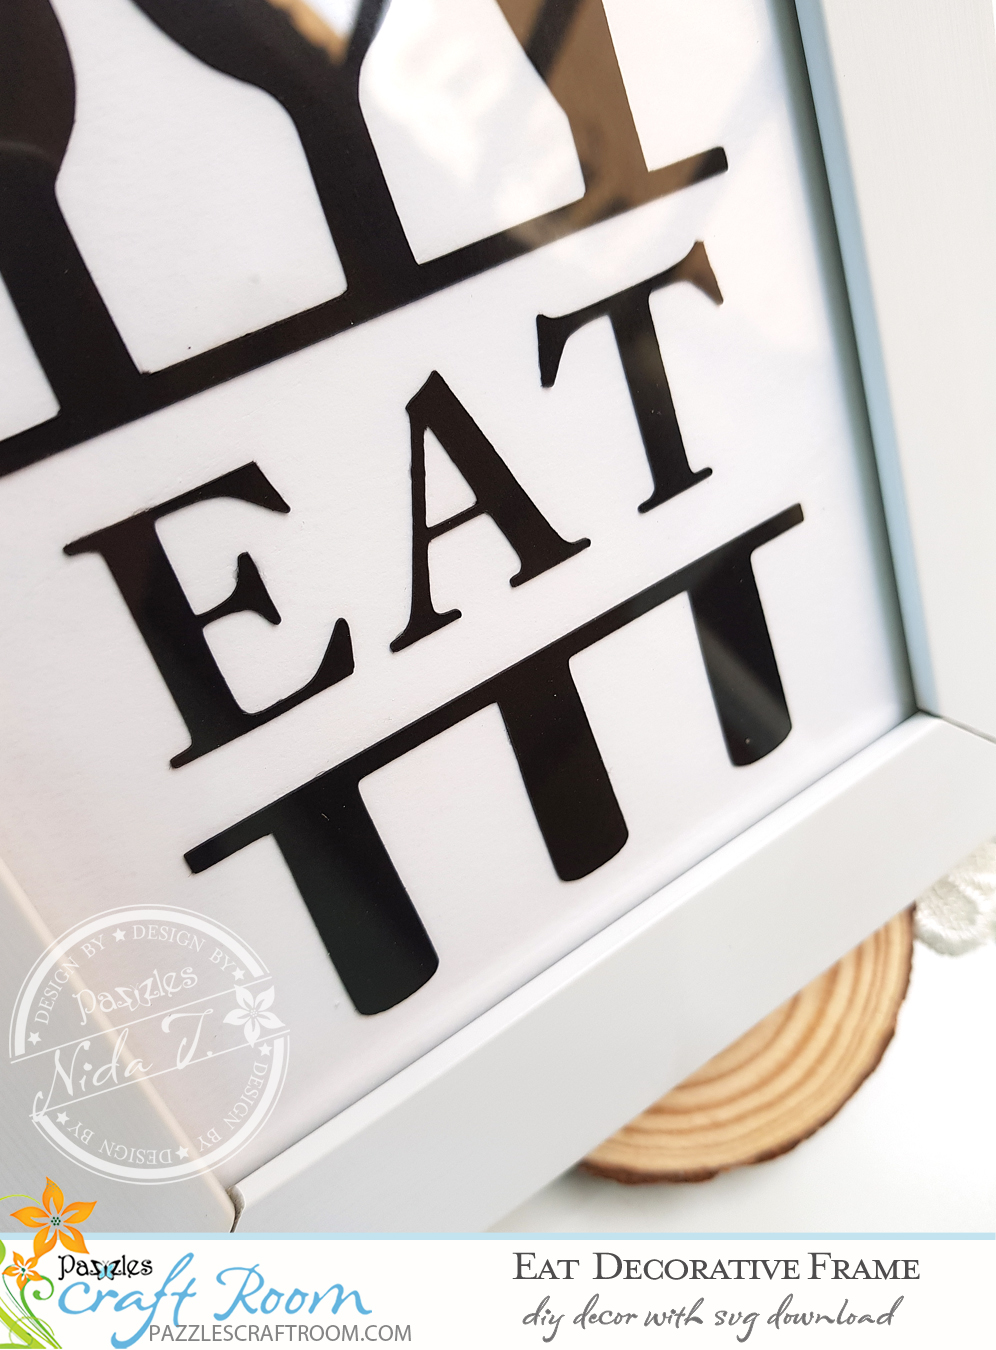 Pazzles DIY Eat Decorative Frame with instant SVG download. Compatible with all major electronic cutters including Pazzles Inspiration, Cricut, and Silhouette Cameo. Design by Nida Tanweer.